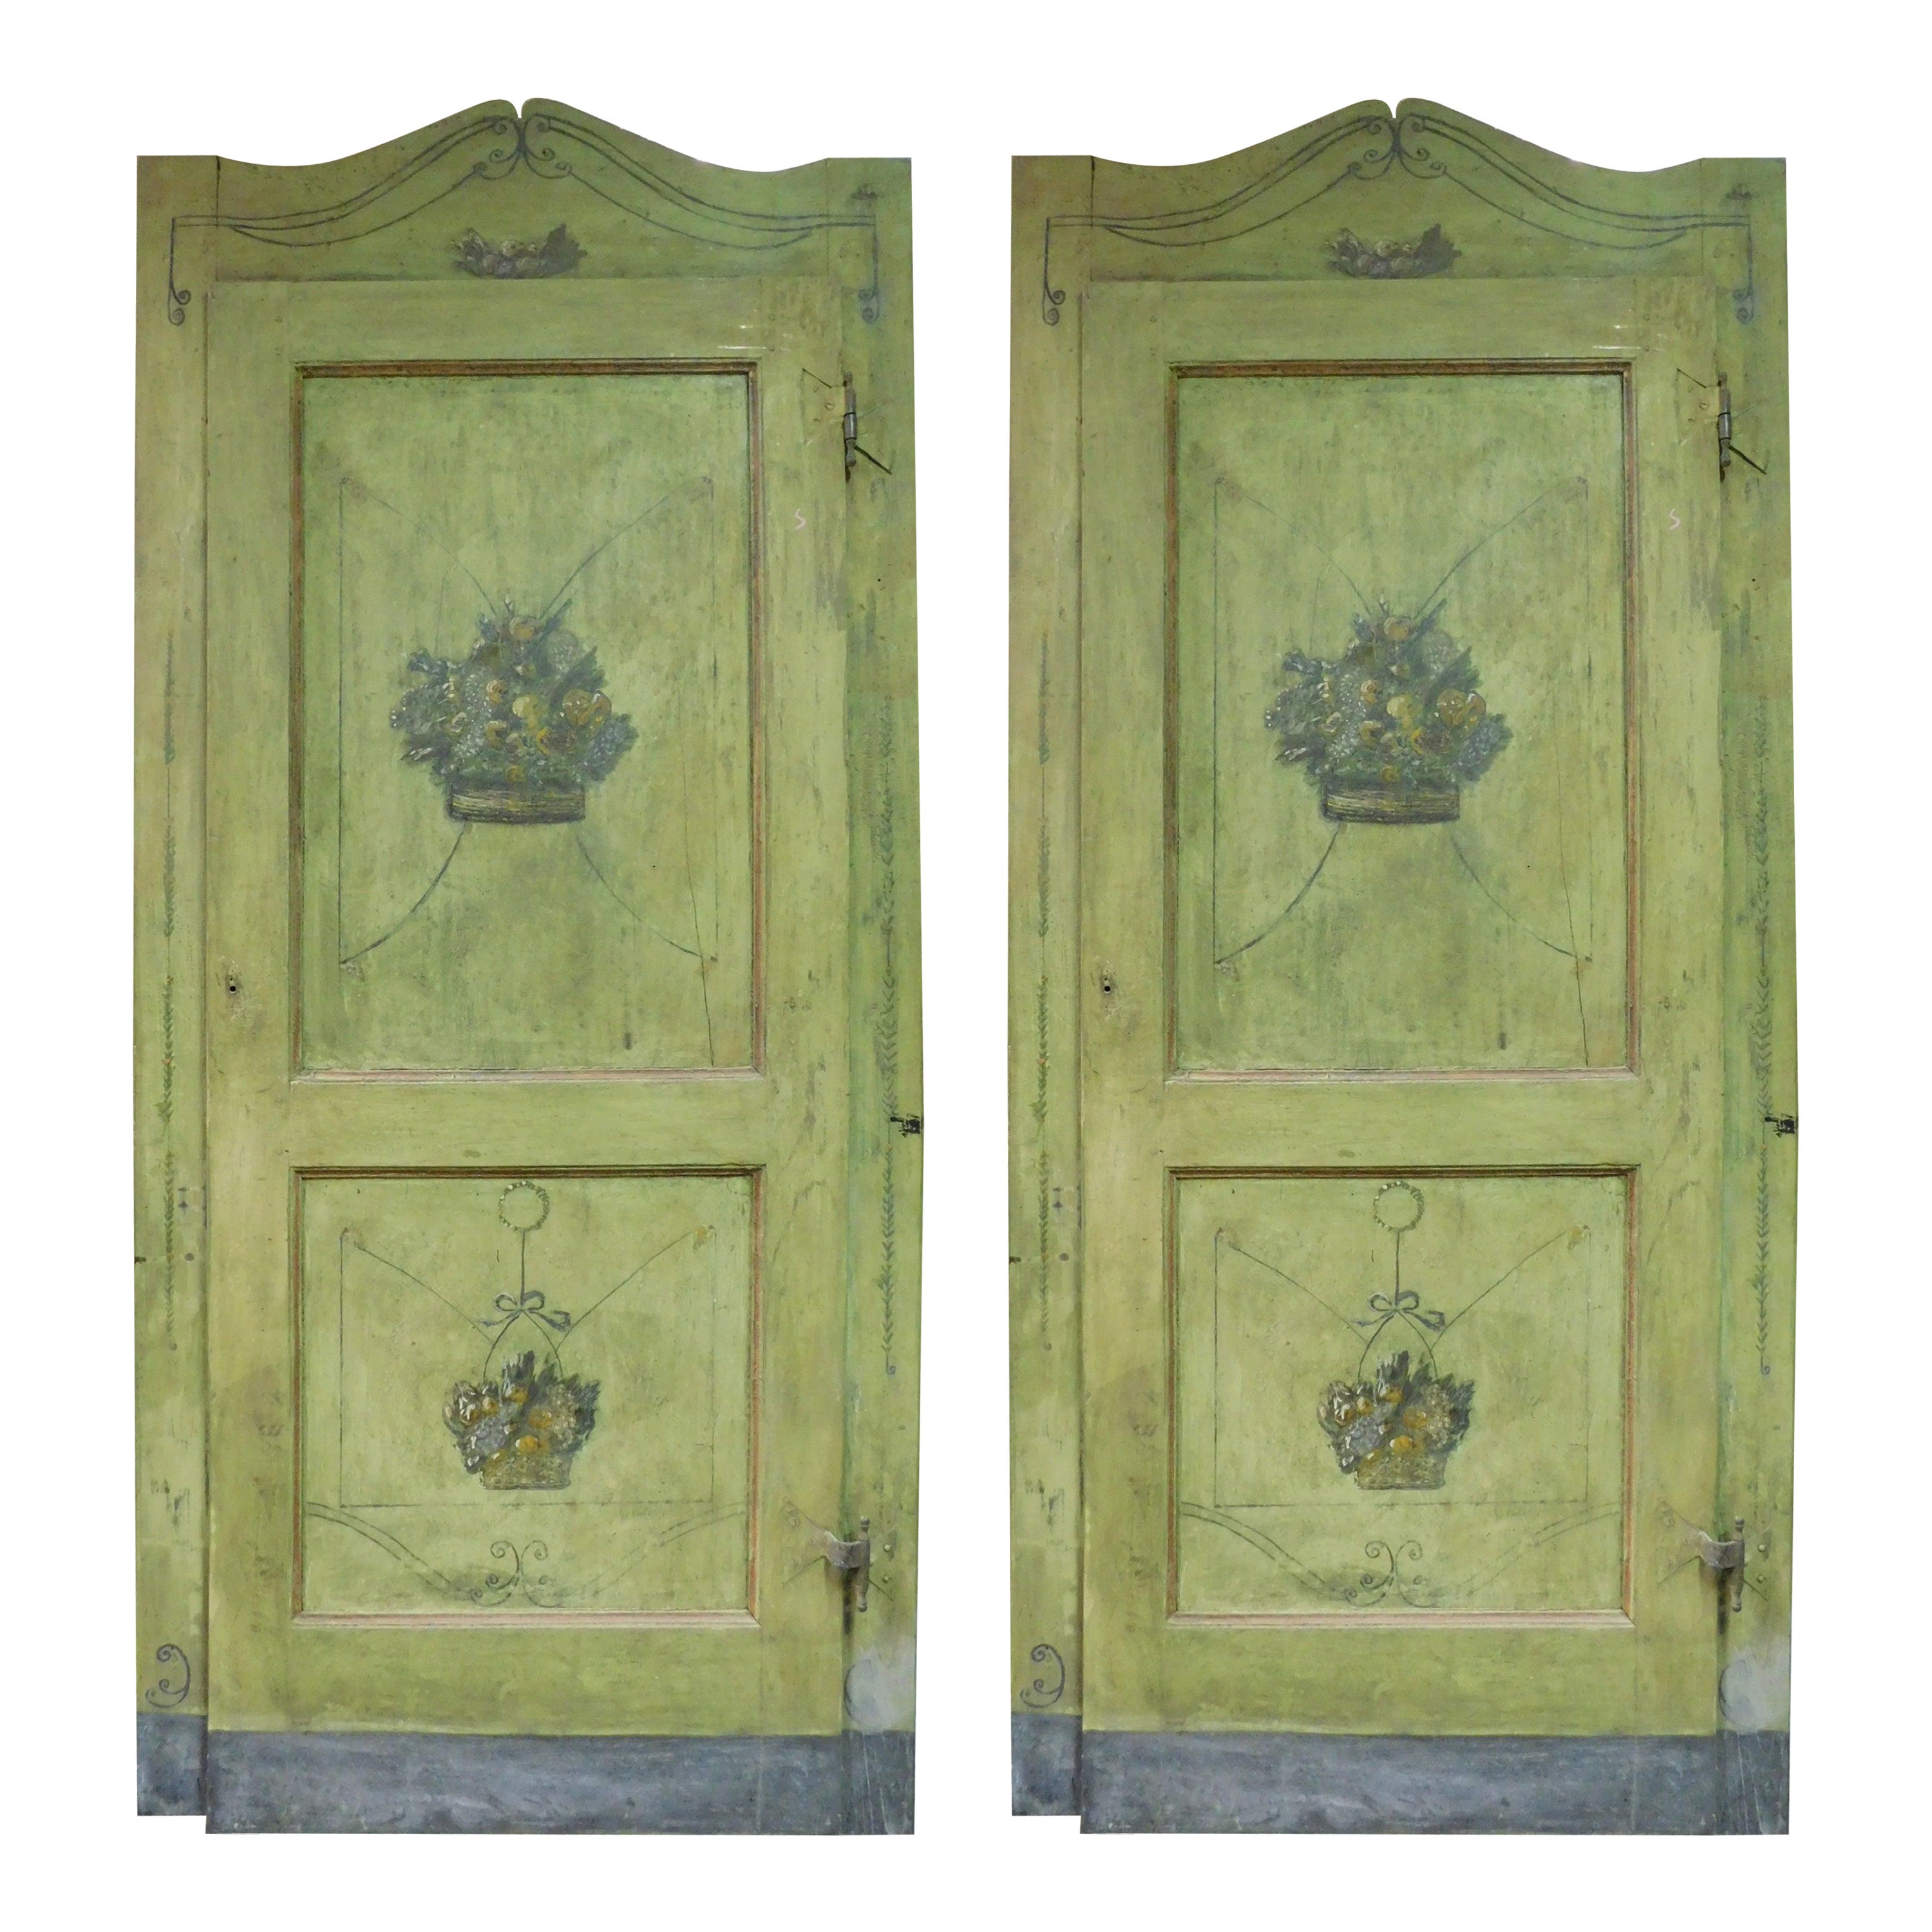 Set of 2 Antique Green Painted Doors Complete with Frame, 18th Century, Italy